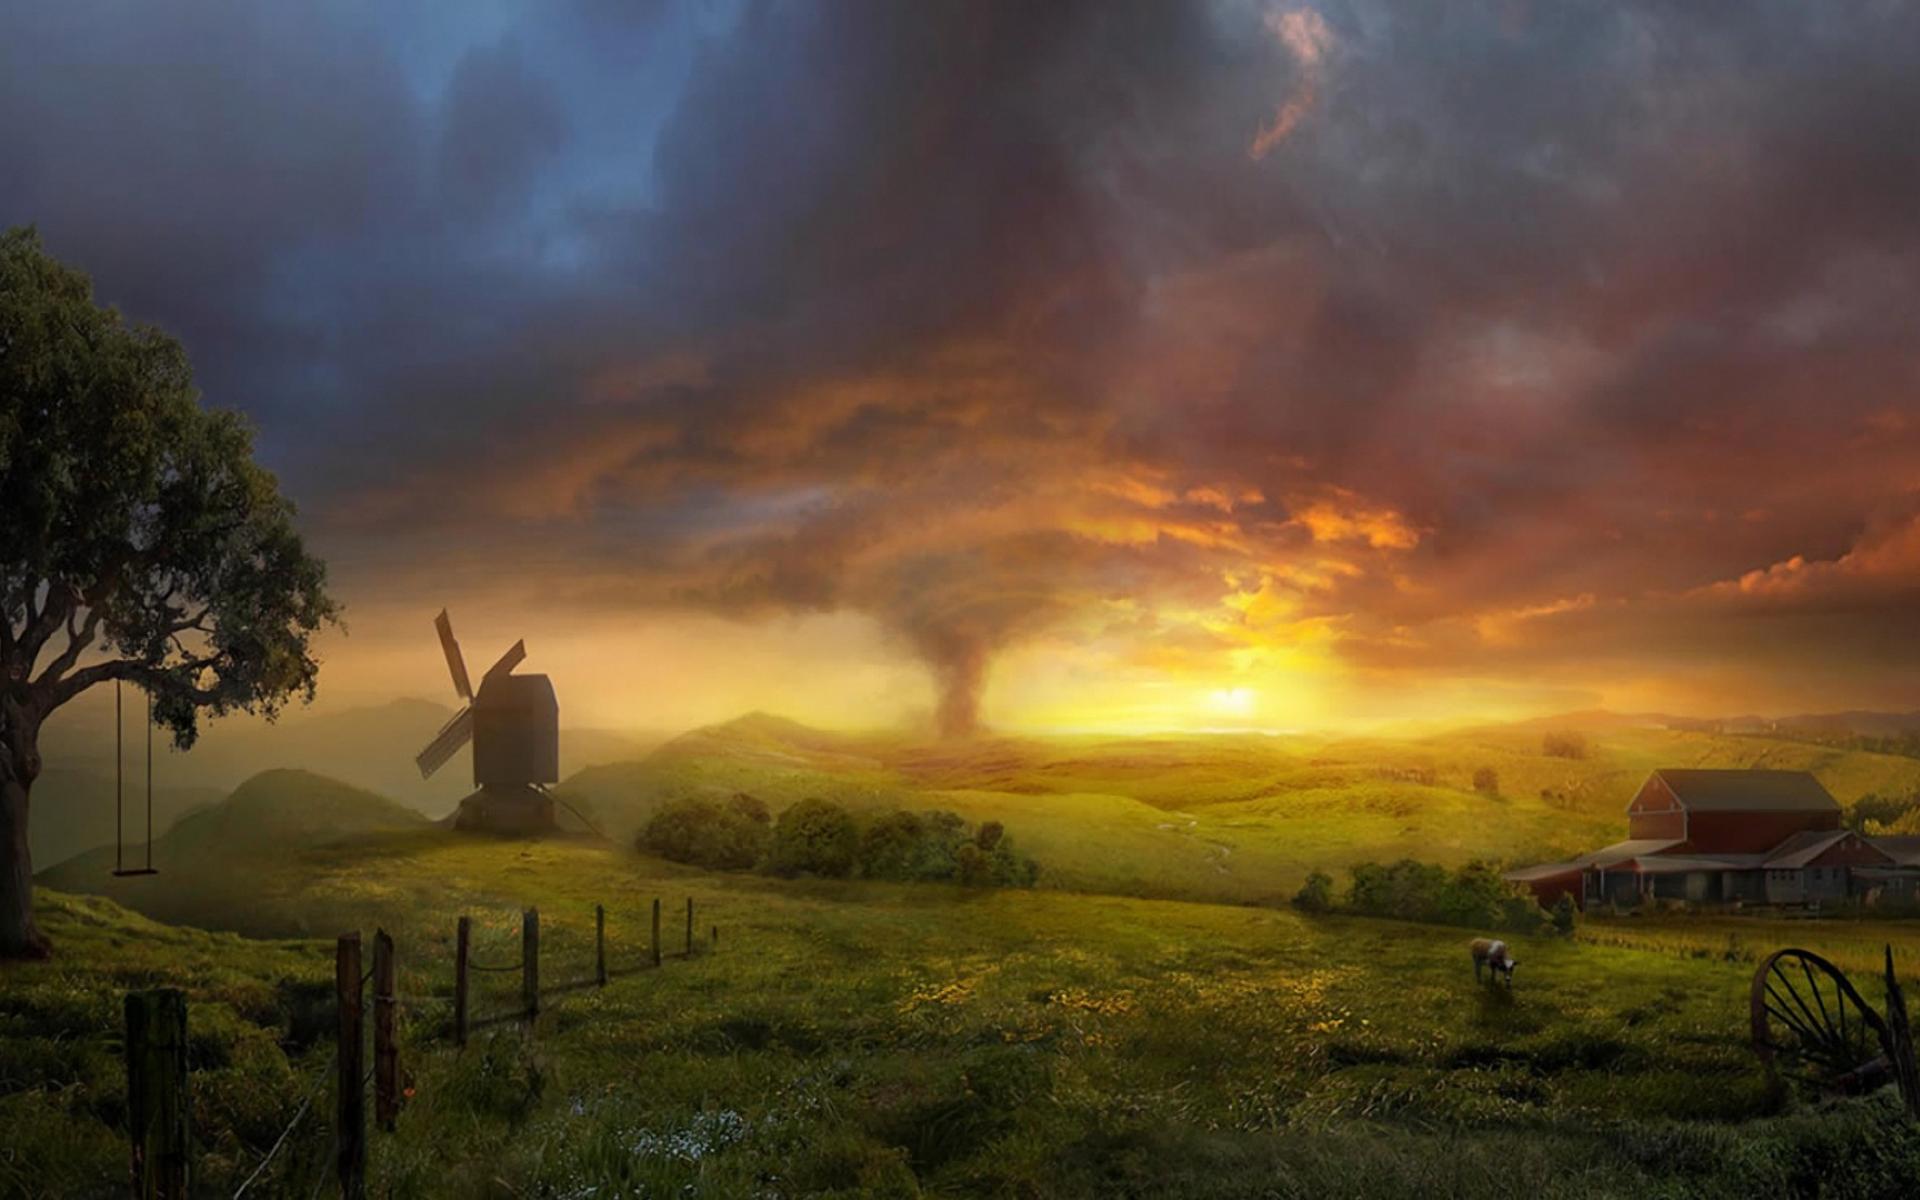 countryside, artistic, landscape, country, farm, painting, tornado